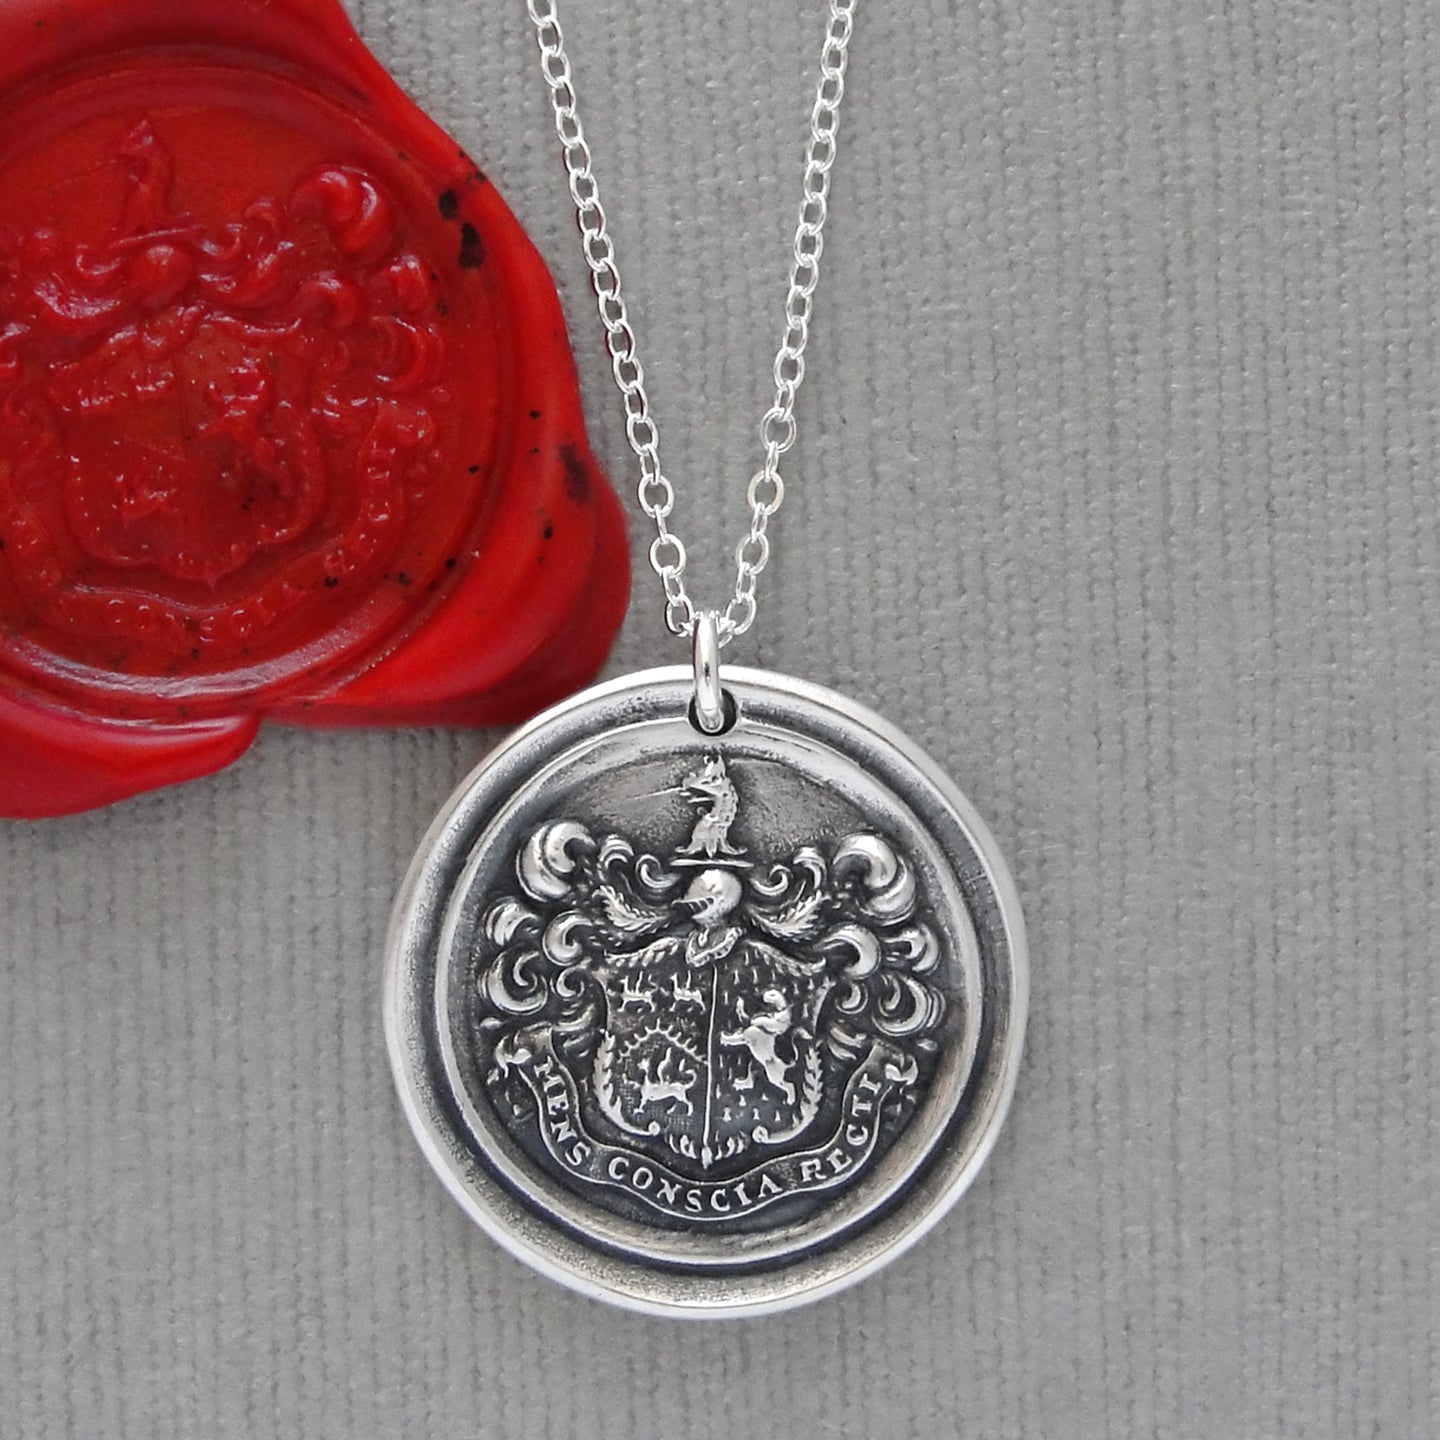 Silver Griffin Wax Seal Necklace - A Mind Aware Of What Is Right